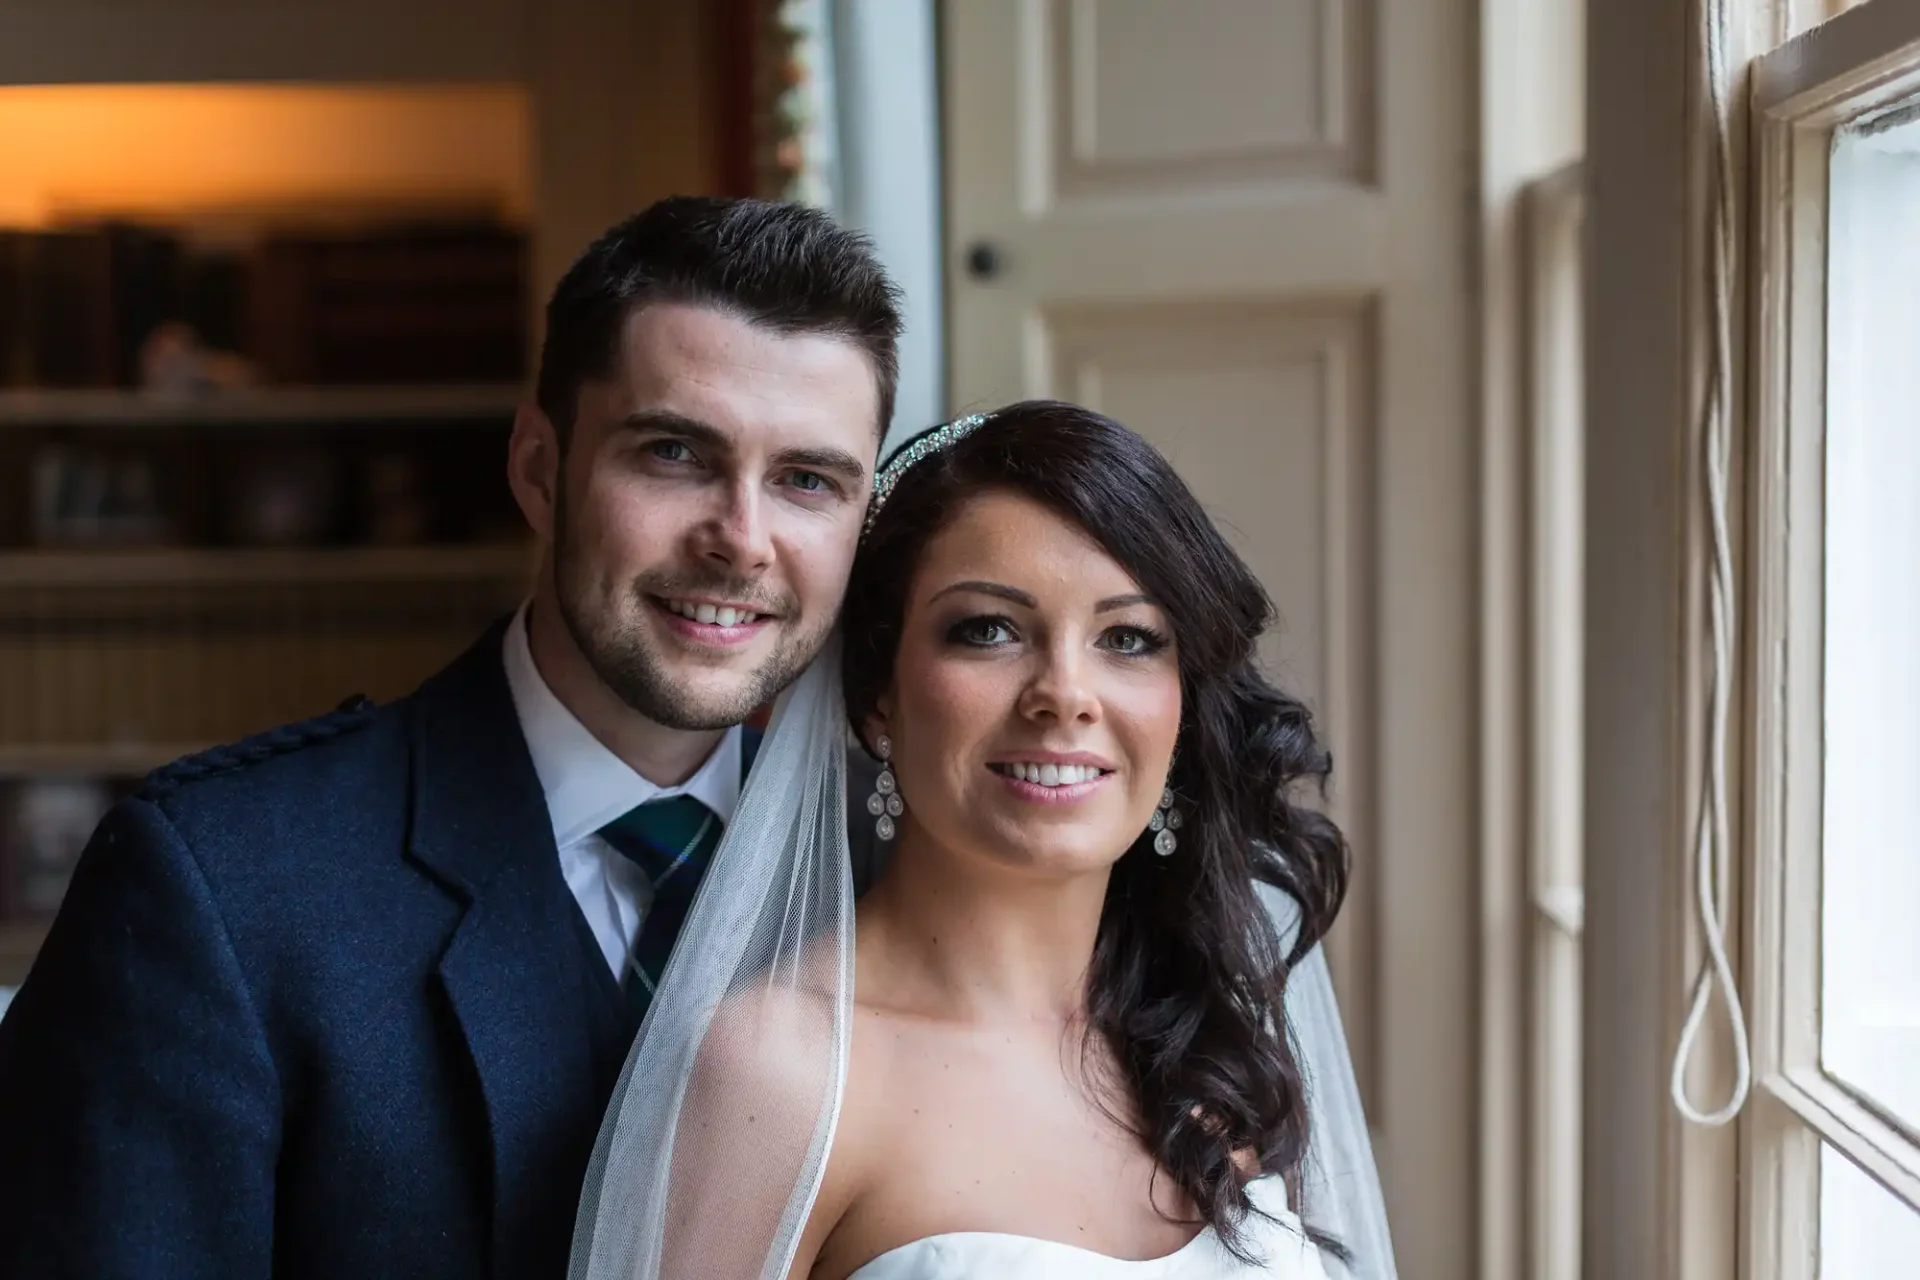 A bride and groom smiling at the camera, standing by a window in a well-lit room, the bride in a white dress and veil, the groom in a dark suit.